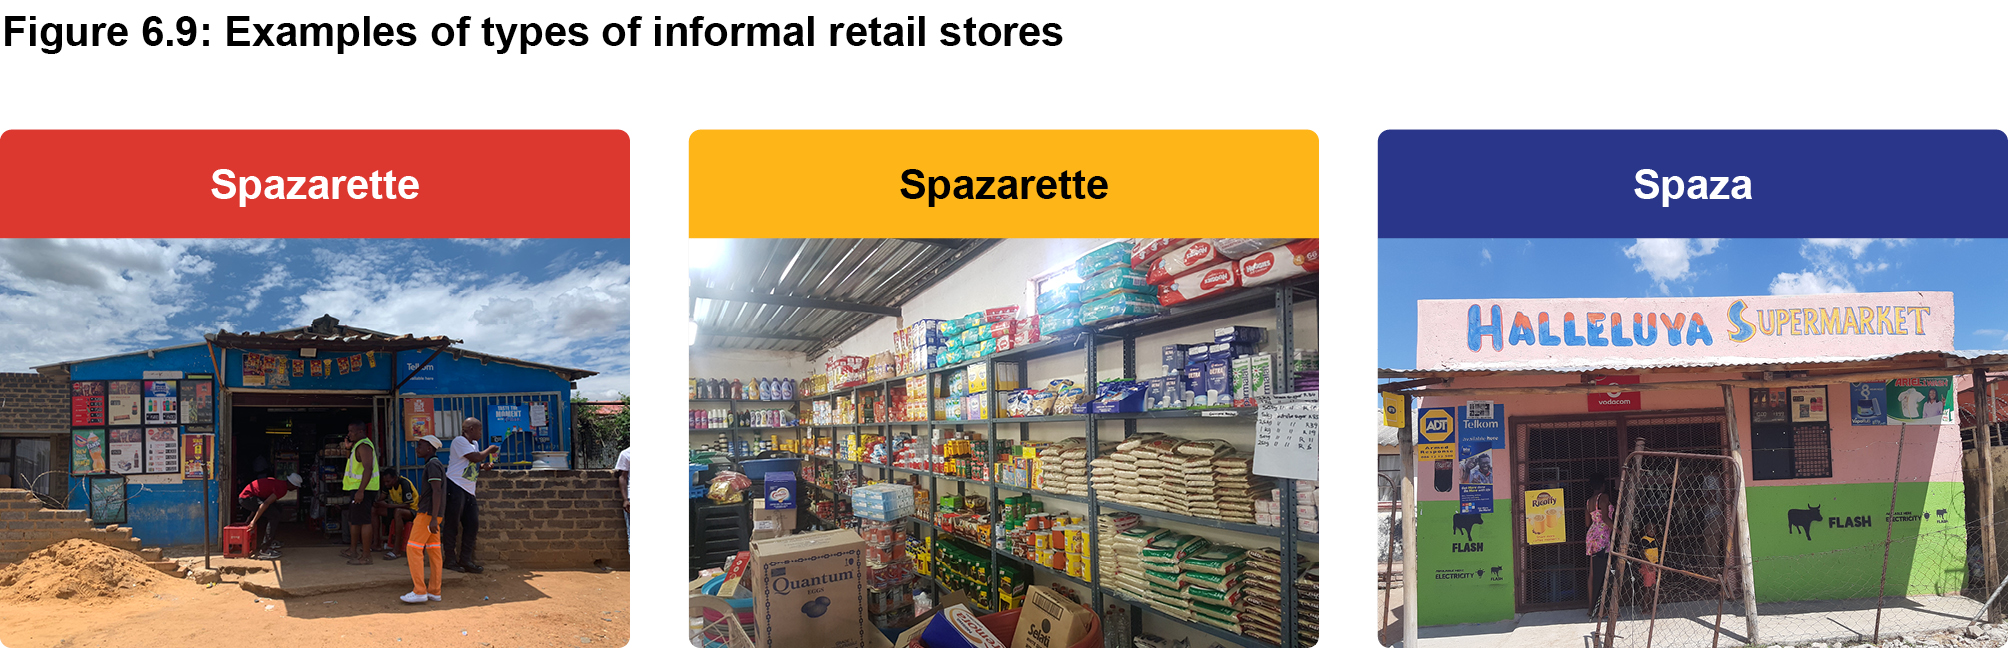 Figure 6.9: Examples of types of informal retail stores